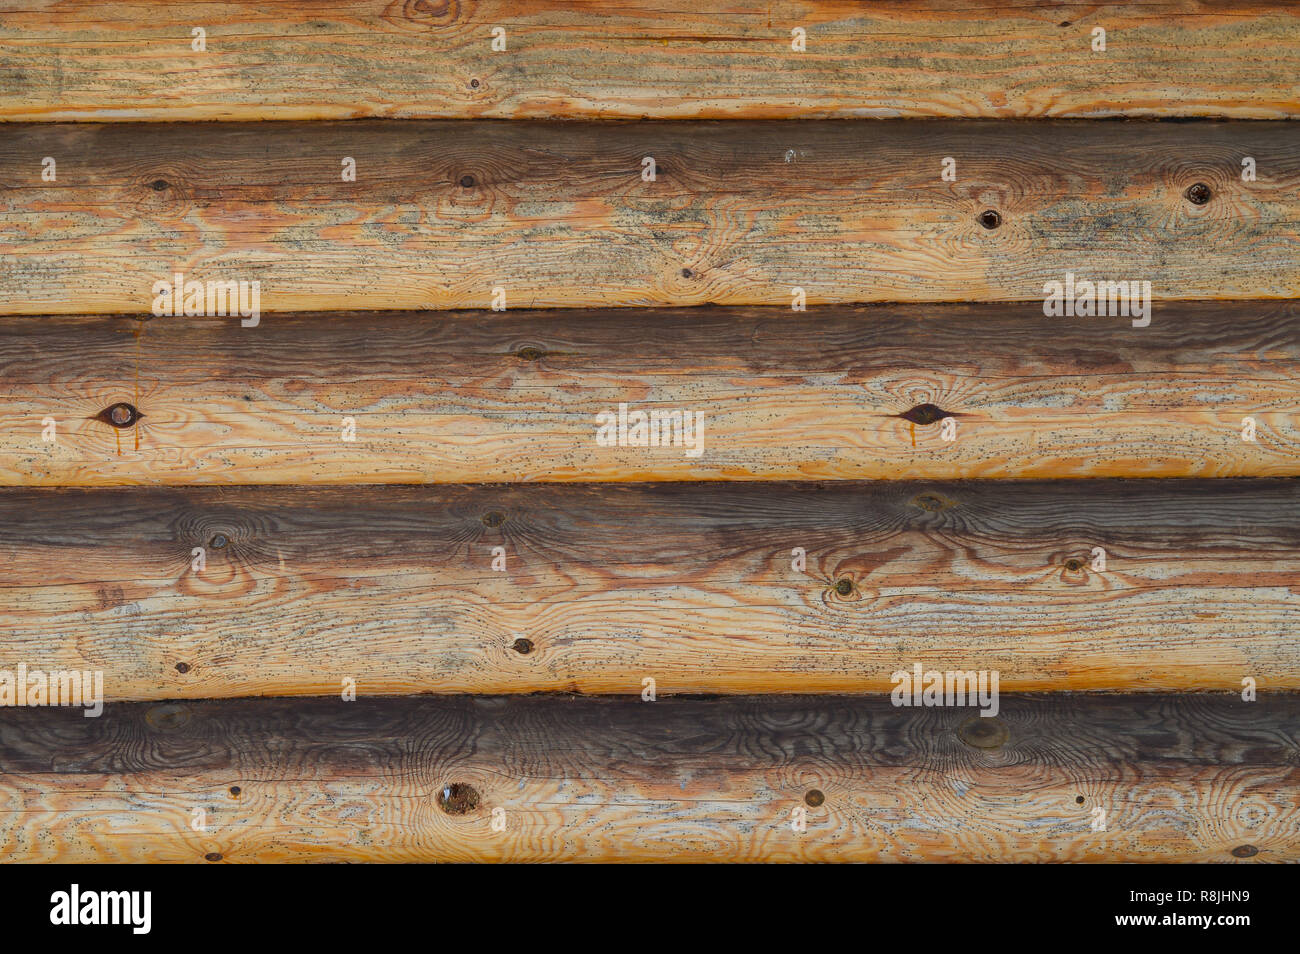 Texture of an old rustic wooden fence made of flat processed boards Stock Photo